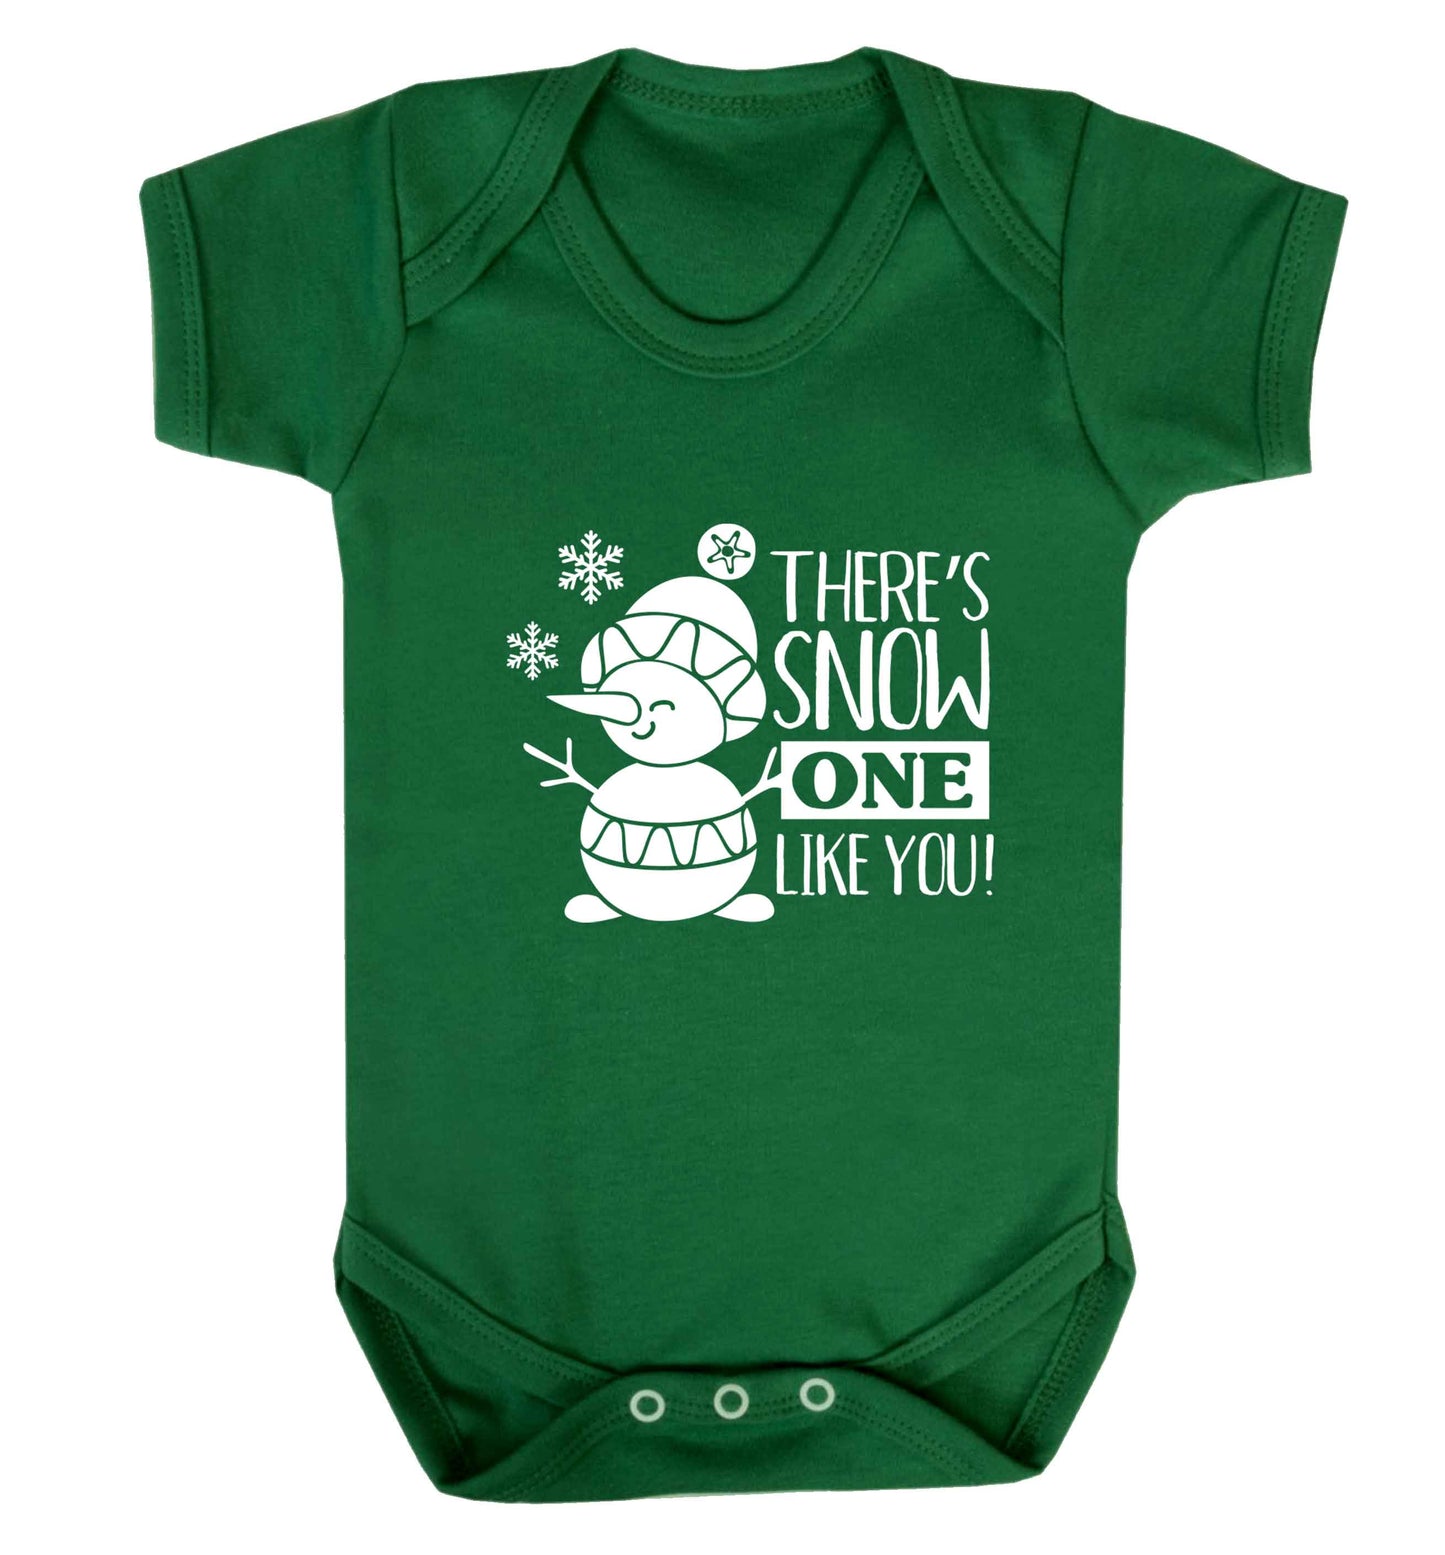 There's snow one like you baby vest green 18-24 months